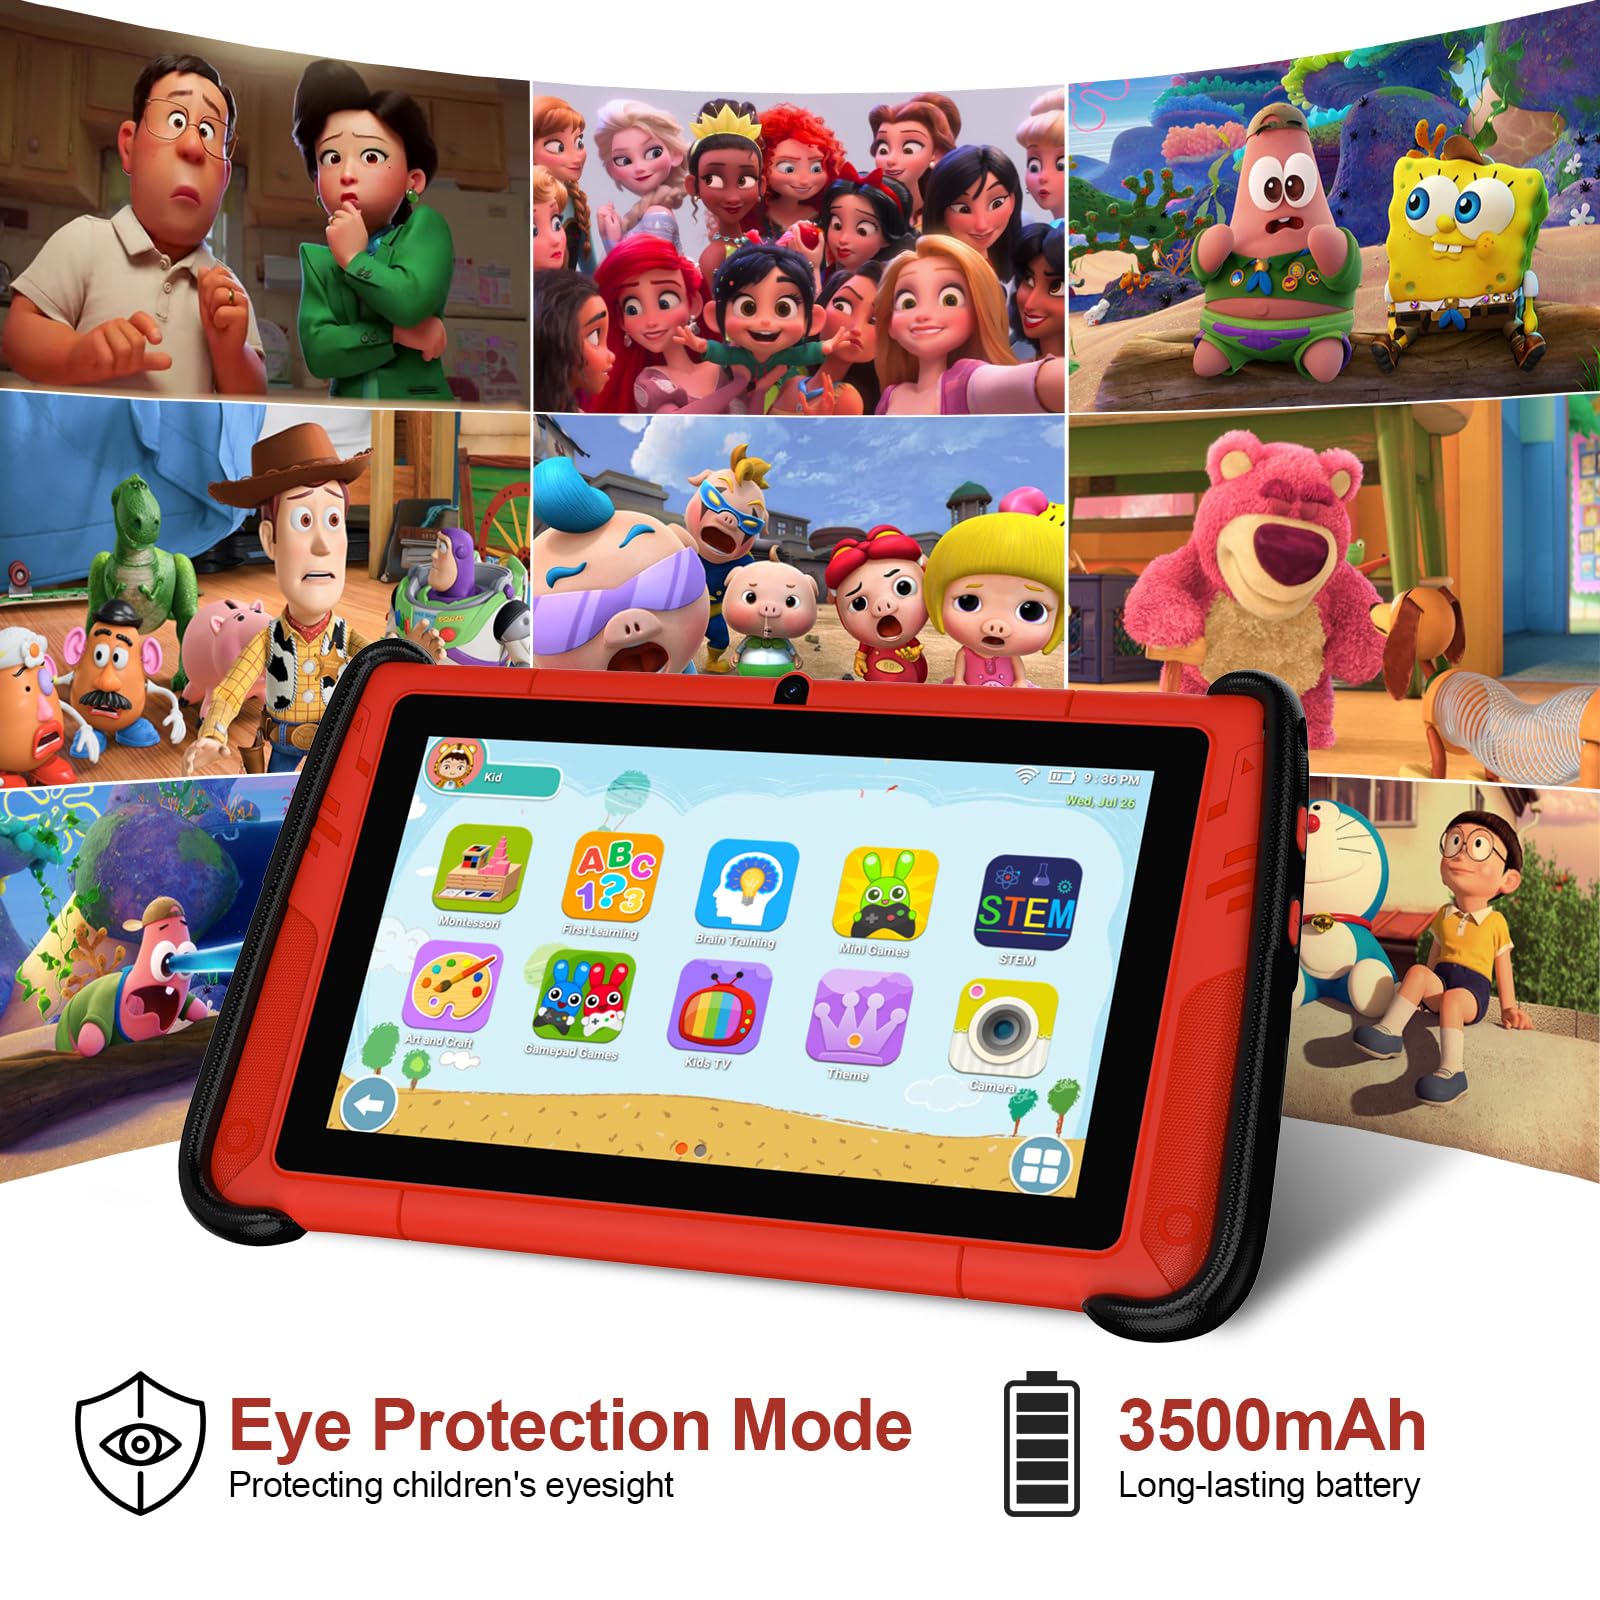 VOLENTEX 7 Inch Kids Tablet, Android 12 Tablet for Children with Game Controllers, 4GB RAM+64GB ROM(Expandable 512GB), Parental Control, Pre-Installed Kids Software, Shockproof Case(Red)